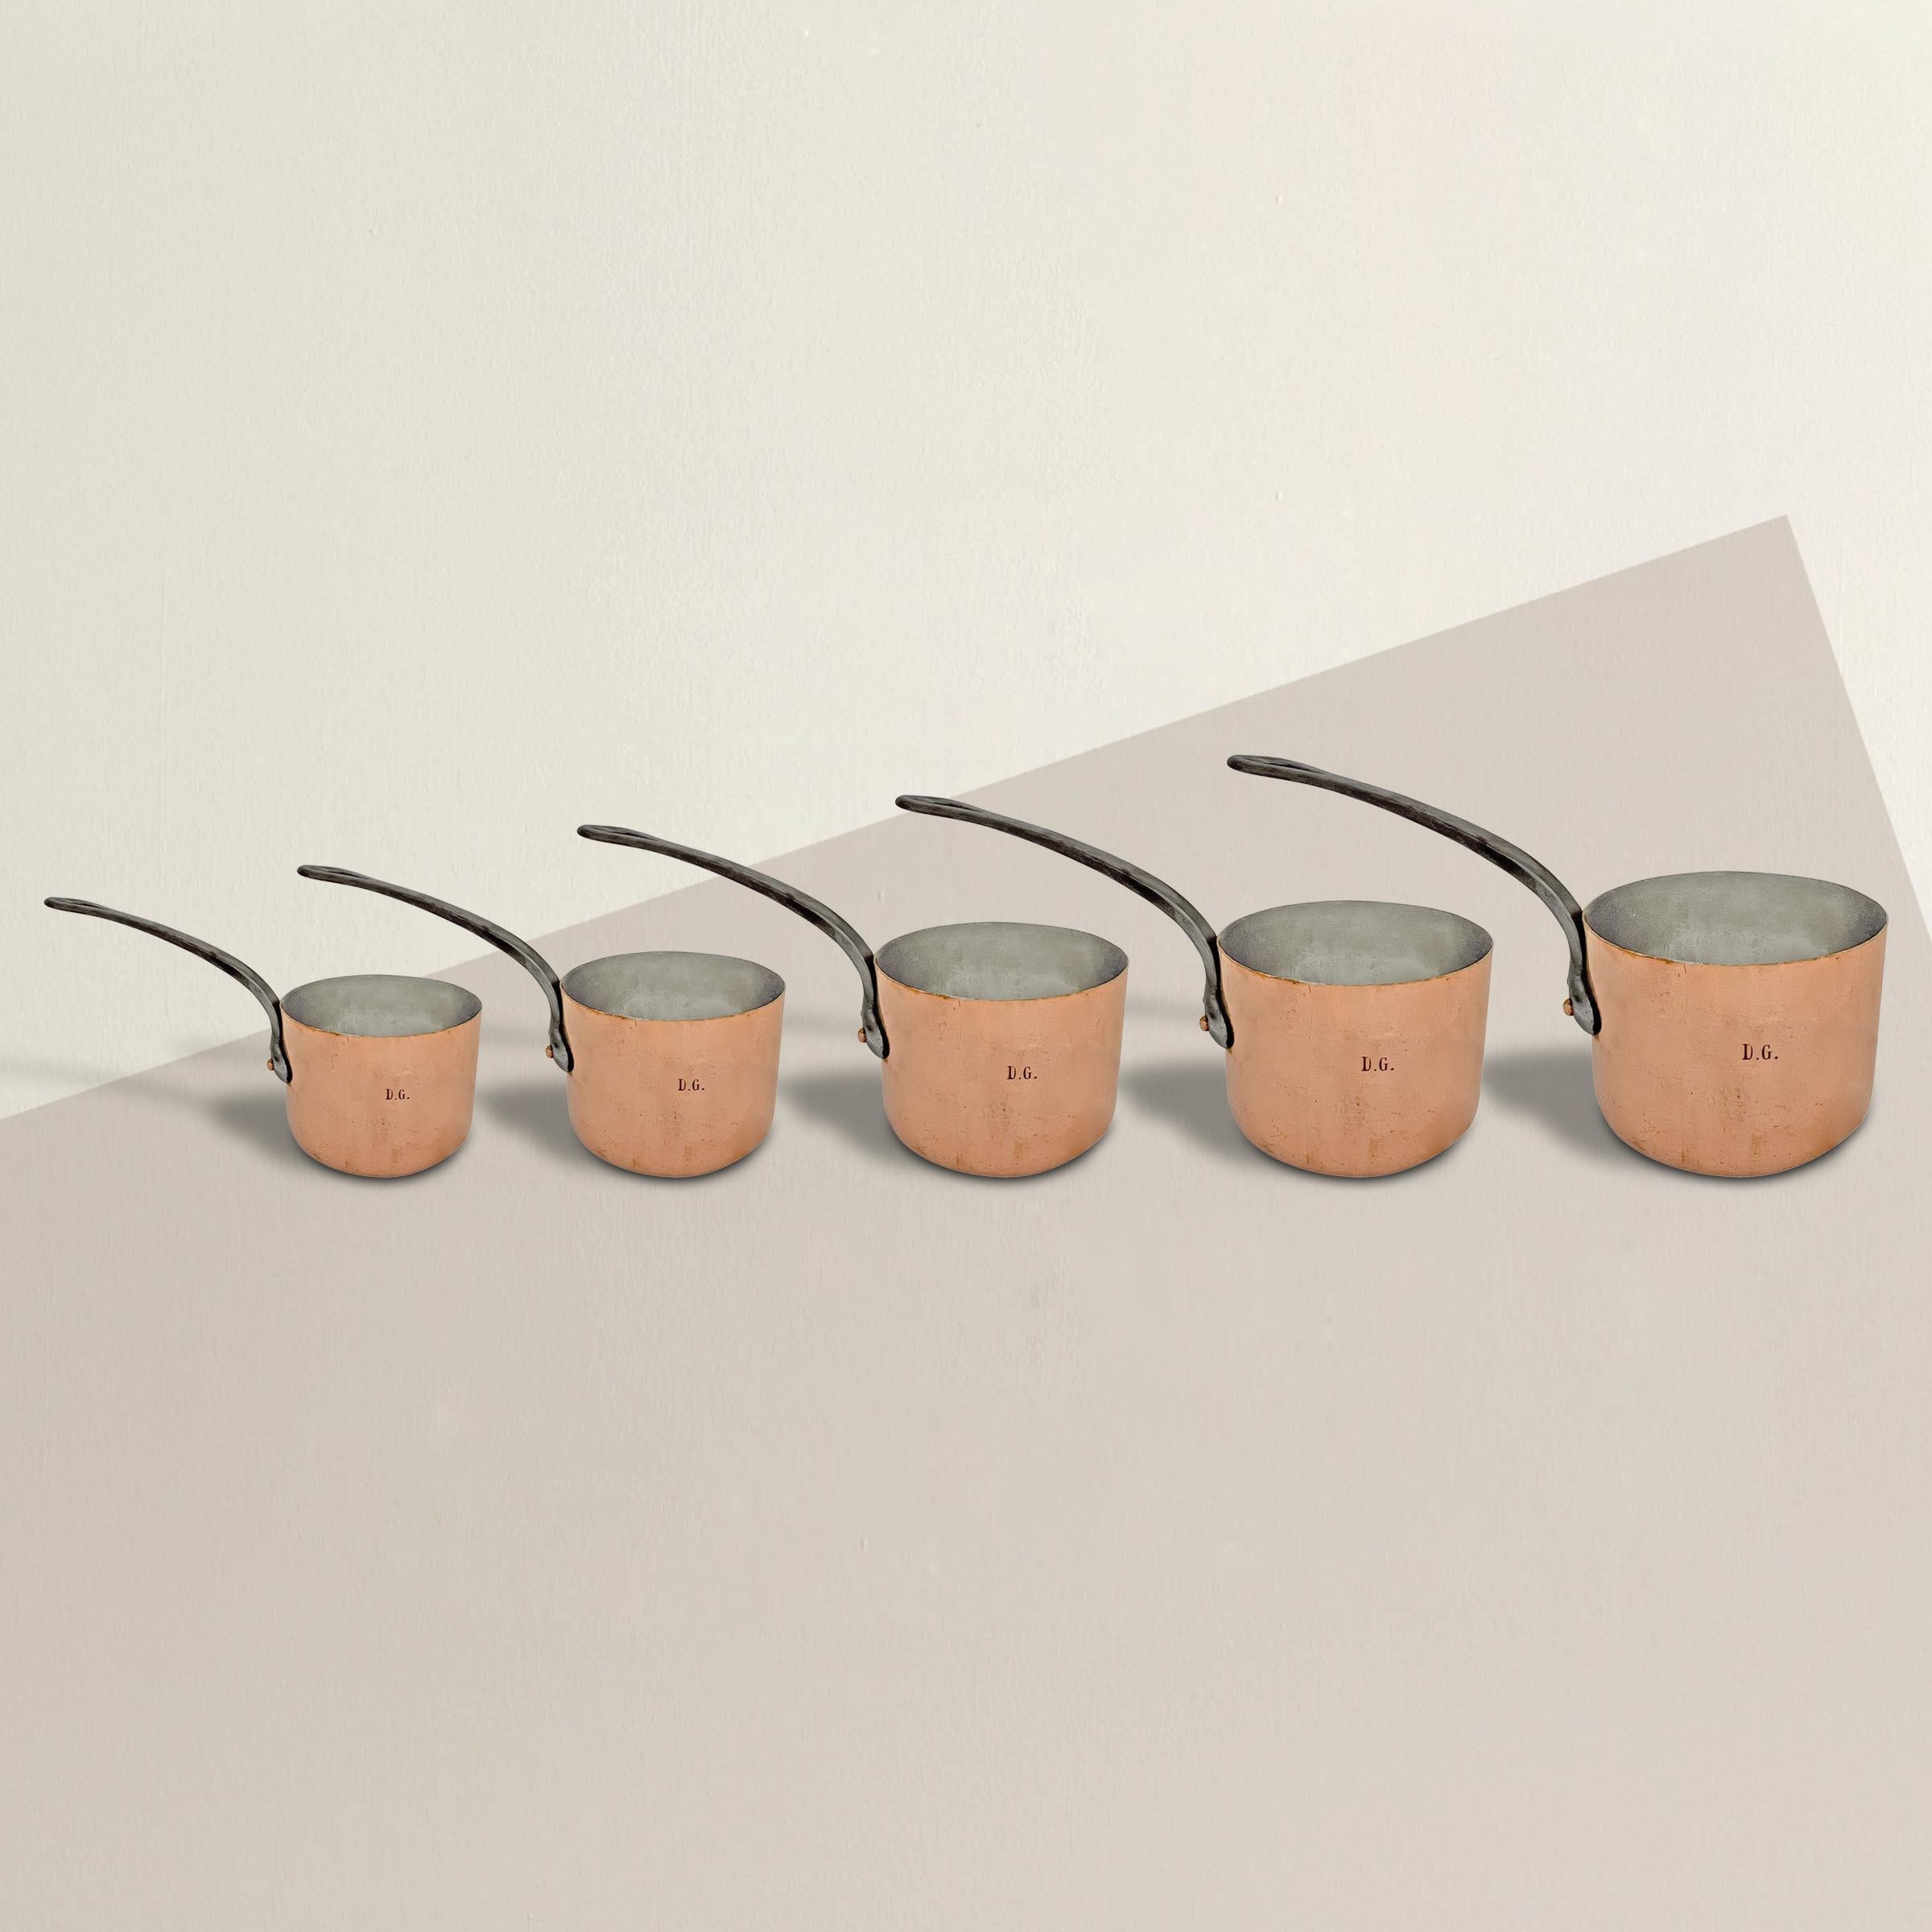 A set of five late 19th century French hand-hammered copper saucepans, ranging in sizes from 4.5 to 9.5 quarts, and all newly re-tinned so they’re ready for another hundred years of use.  Based on their sizes, this set was probably used in the